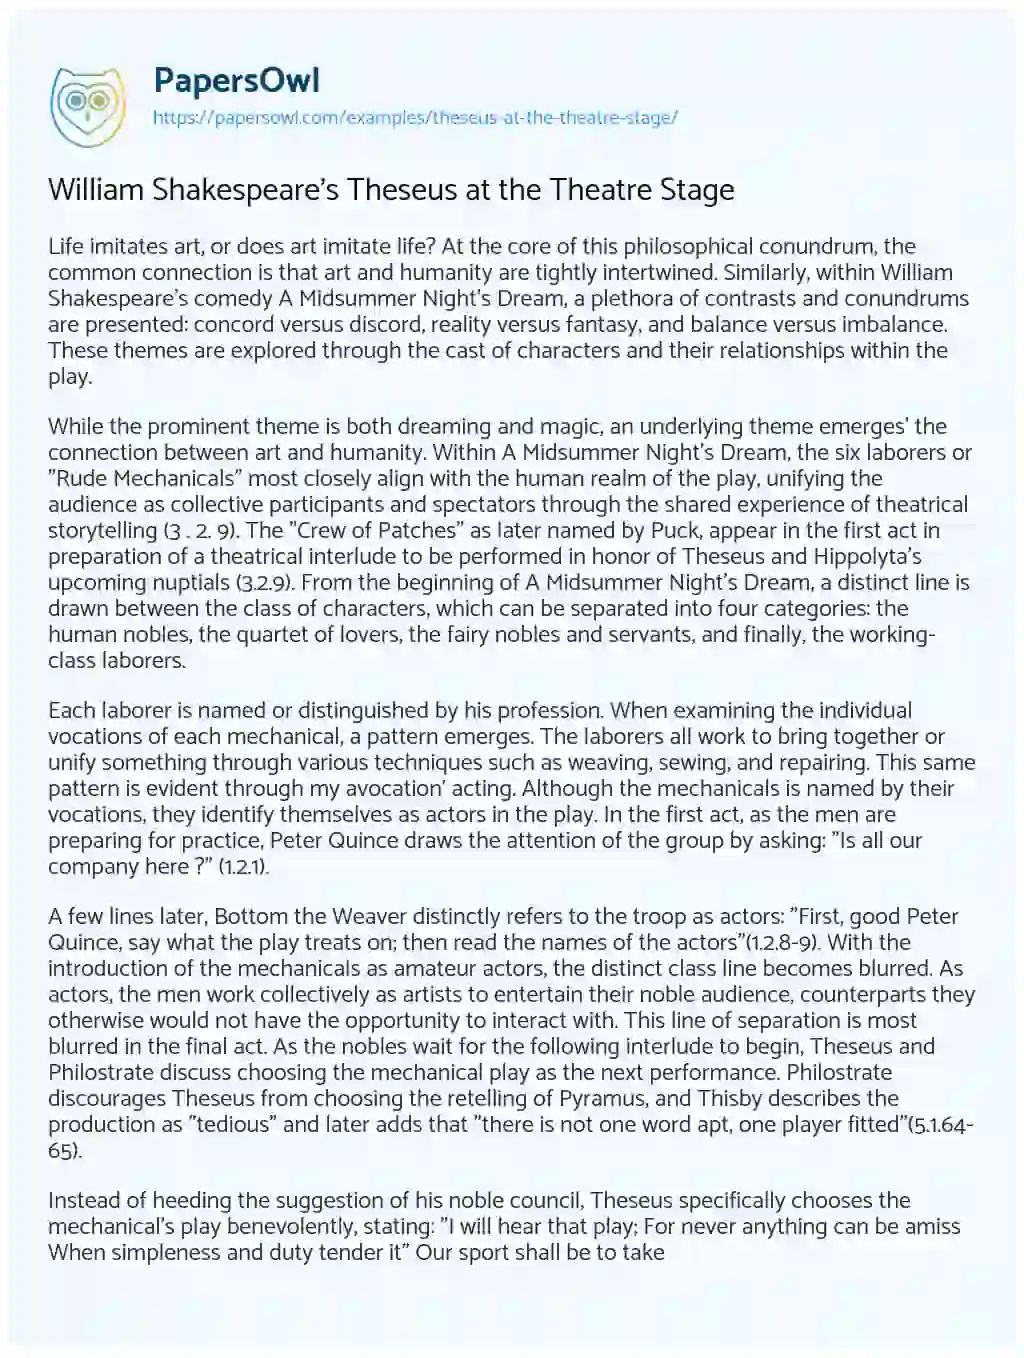 Essay on William Shakespeare’s Theseus at the Theatre Stage